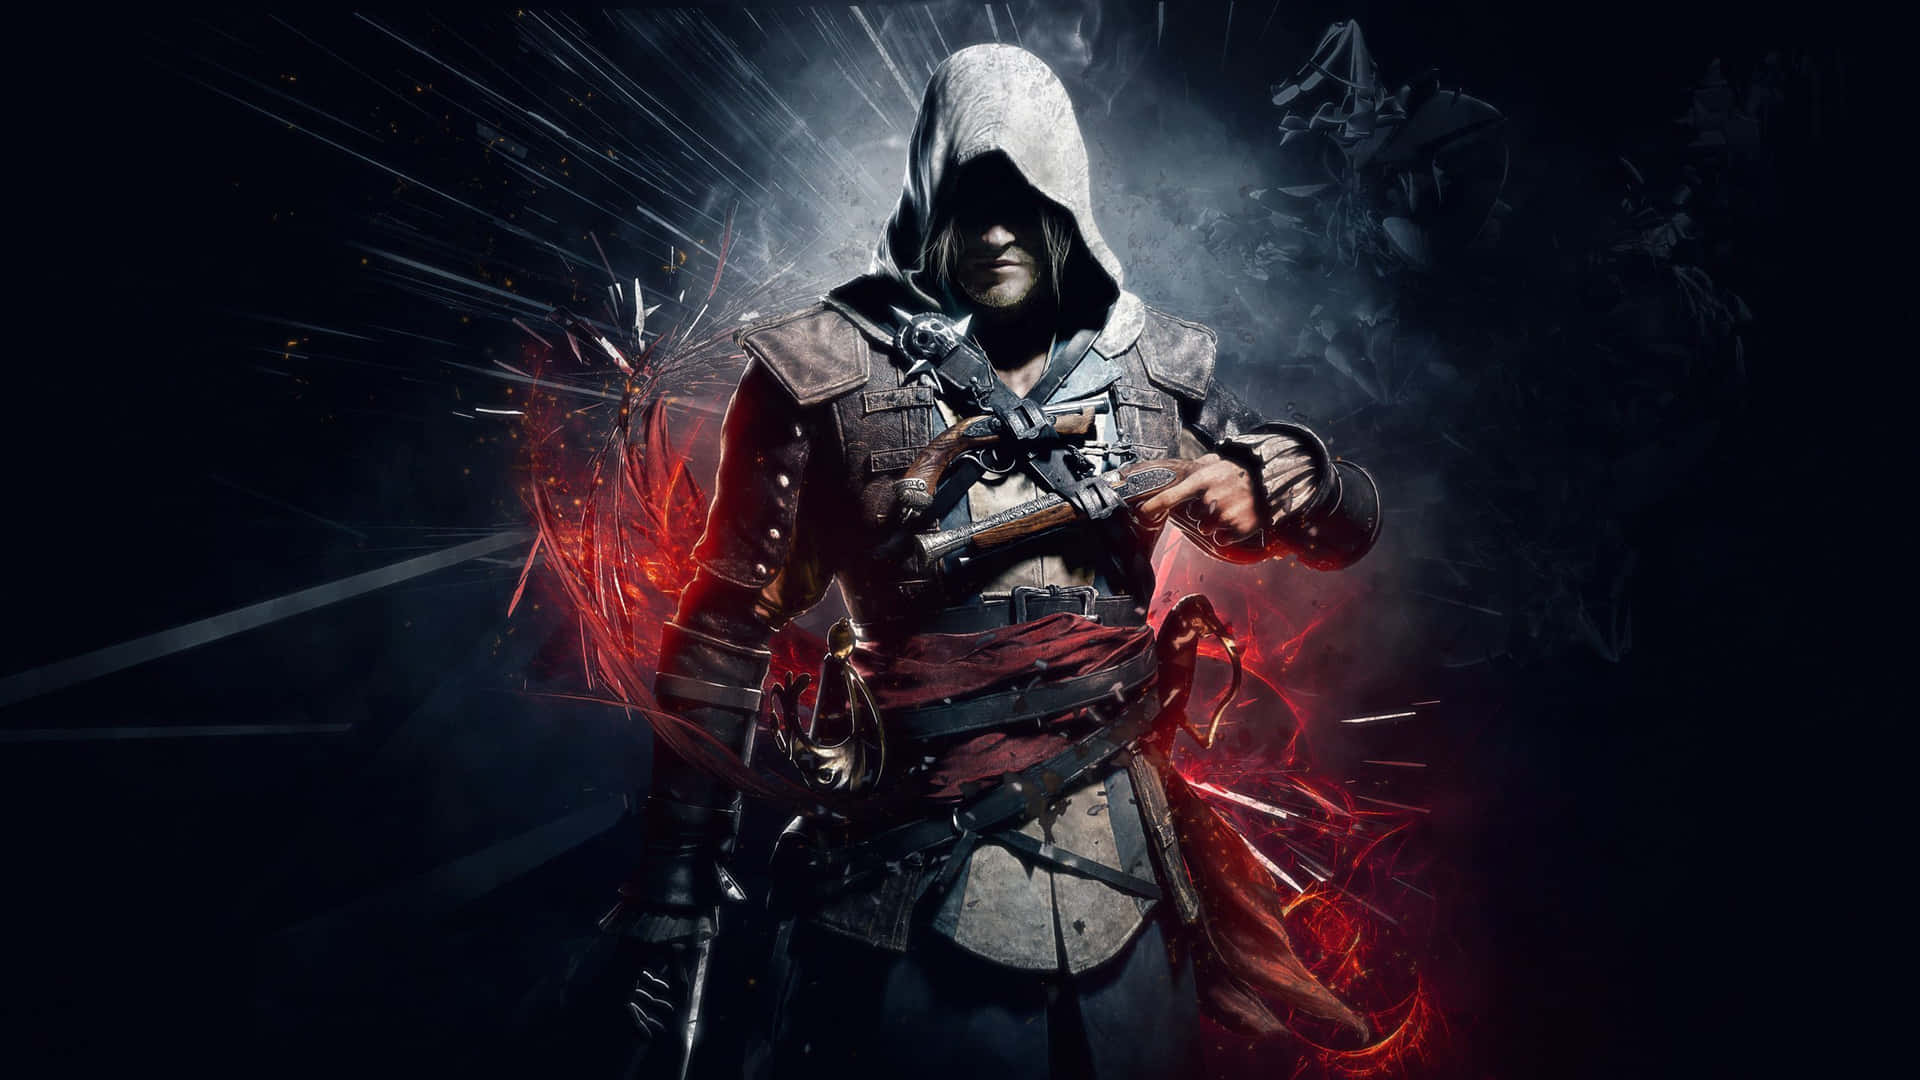 Cool Ps4 Character Edward Kenway From Assassin's Creed Iv: Black Flag